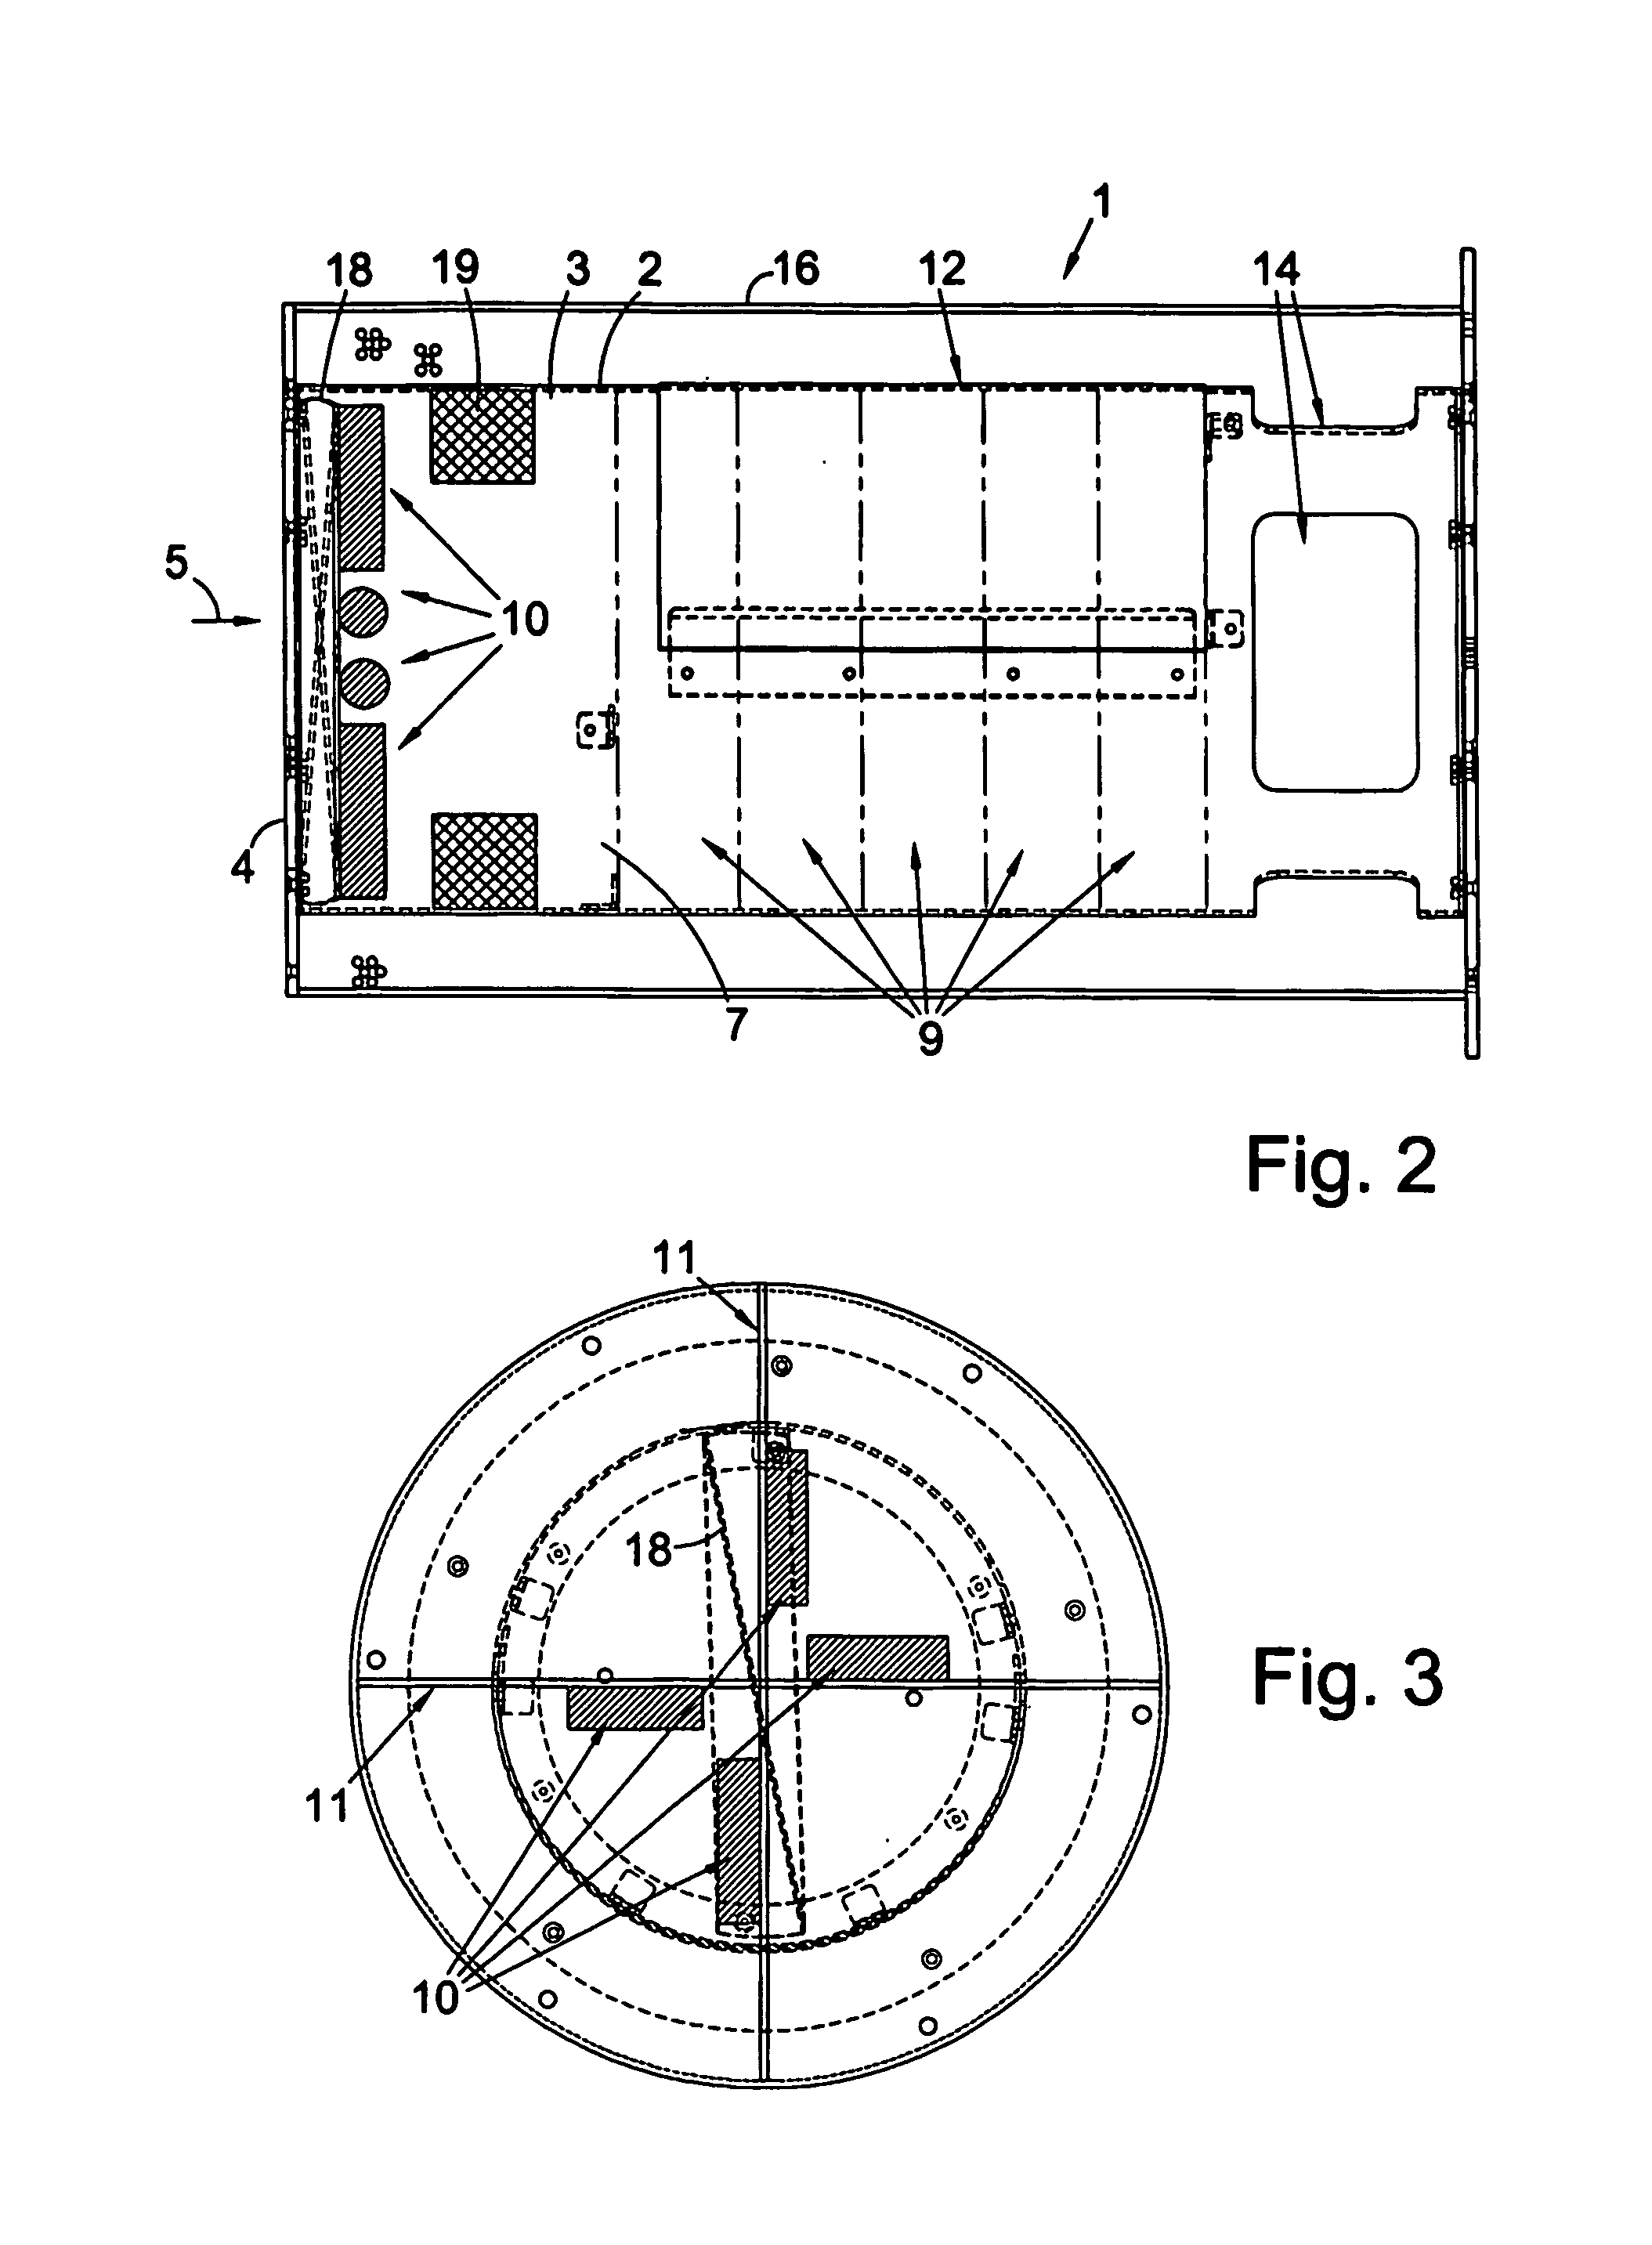 Air filtration device